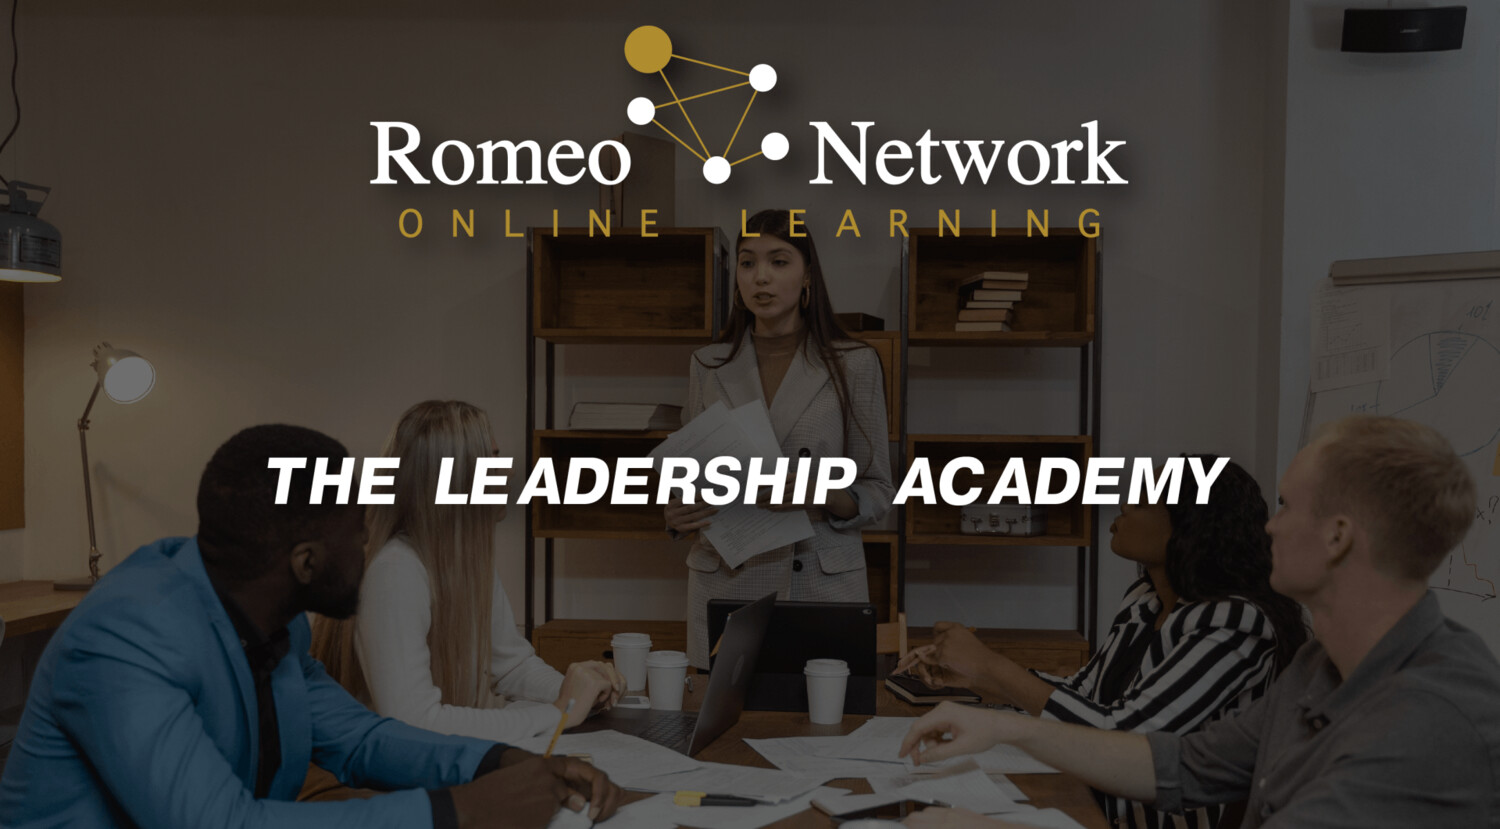 The Leadership Academy: Inspiring Others To Greatness (5-Part Series on 10/04, 10/11, 10/18, 10/25, & 11/01)